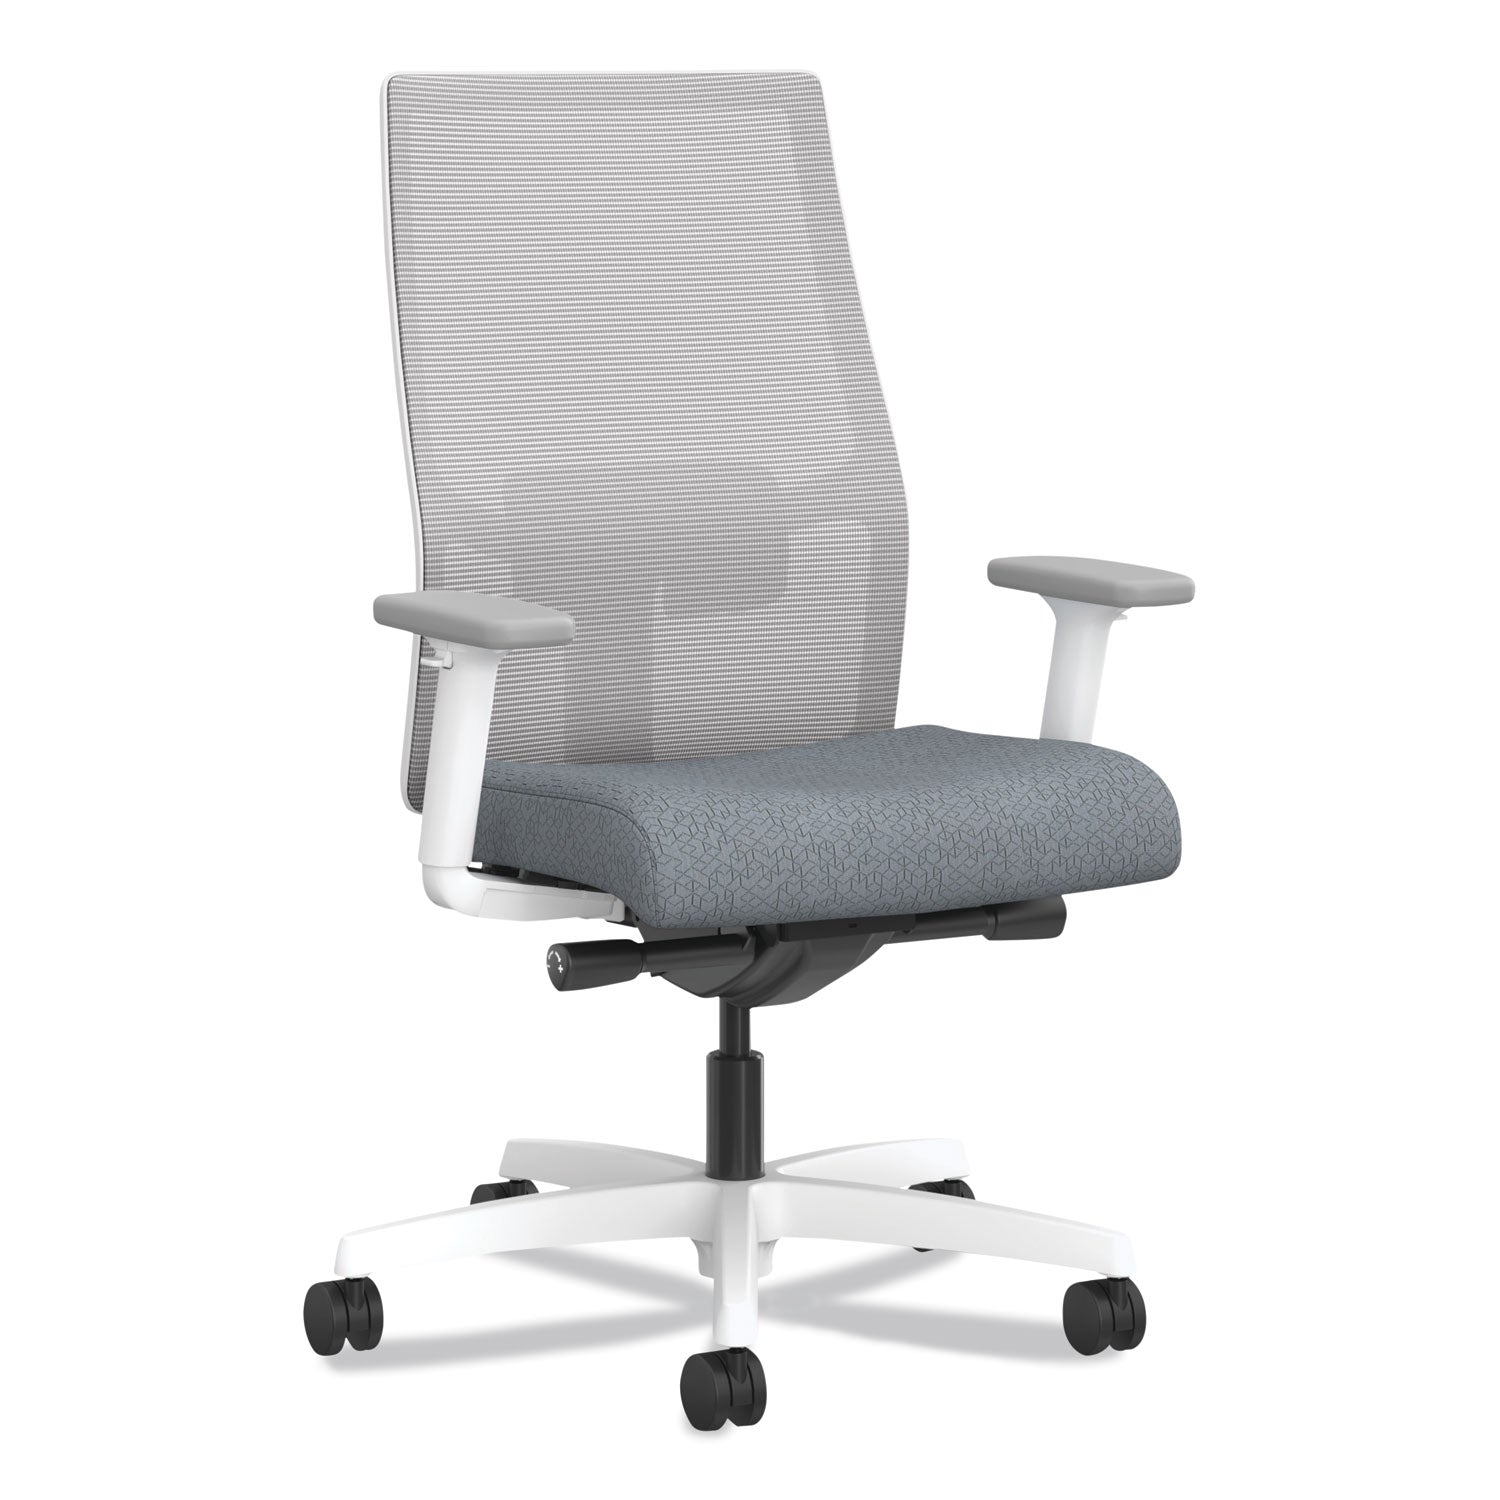 ignition-20-4-way-stretch-mid-back-mesh-task-chair-gray-adjustable-lumbar-support-basalt-fog-white-ships-in-7-10-bus-days_honi2mm2afa25tx - 1